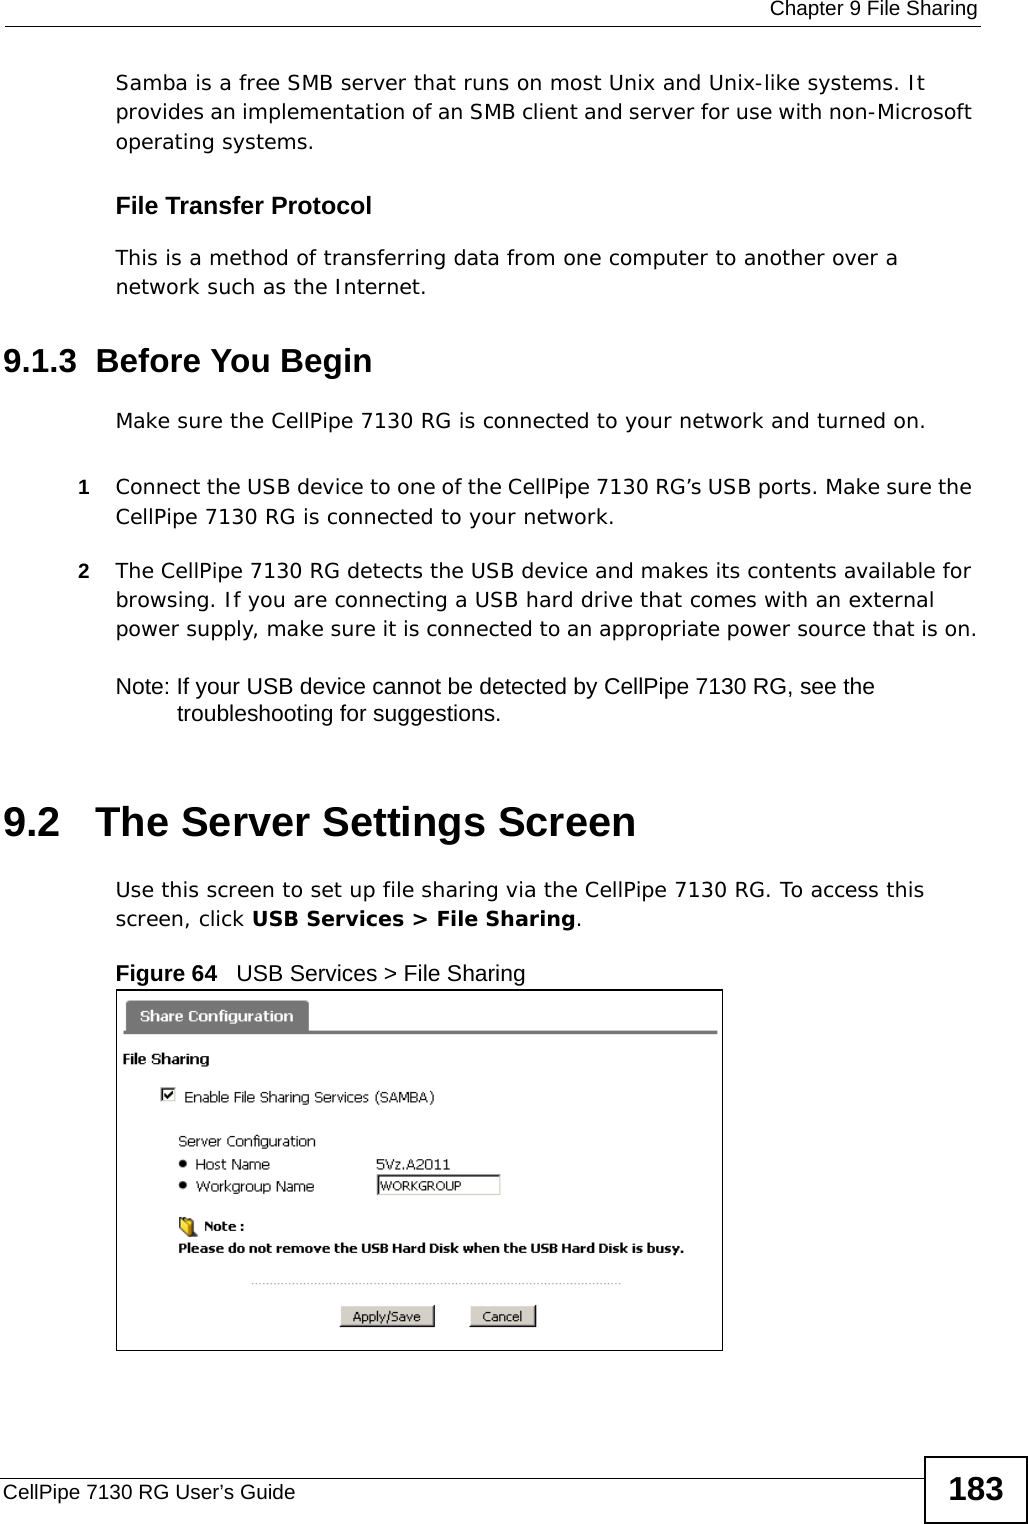  Chapter 9 File SharingCellPipe 7130 RG User’s Guide 183Samba is a free SMB server that runs on most Unix and Unix-like systems. It provides an implementation of an SMB client and server for use with non-Microsoft operating systems. File Transfer Protocol This is a method of transferring data from one computer to another over a network such as the Internet.9.1.3  Before You BeginMake sure the CellPipe 7130 RG is connected to your network and turned on.1Connect the USB device to one of the CellPipe 7130 RG’s USB ports. Make sure the CellPipe 7130 RG is connected to your network.2The CellPipe 7130 RG detects the USB device and makes its contents available for browsing. If you are connecting a USB hard drive that comes with an external power supply, make sure it is connected to an appropriate power source that is on.Note: If your USB device cannot be detected by CellPipe 7130 RG, see the troubleshooting for suggestions. 9.2   The Server Settings ScreenUse this screen to set up file sharing via the CellPipe 7130 RG. To access this screen, click USB Services &gt; File Sharing.Figure 64   USB Services &gt; File Sharing 